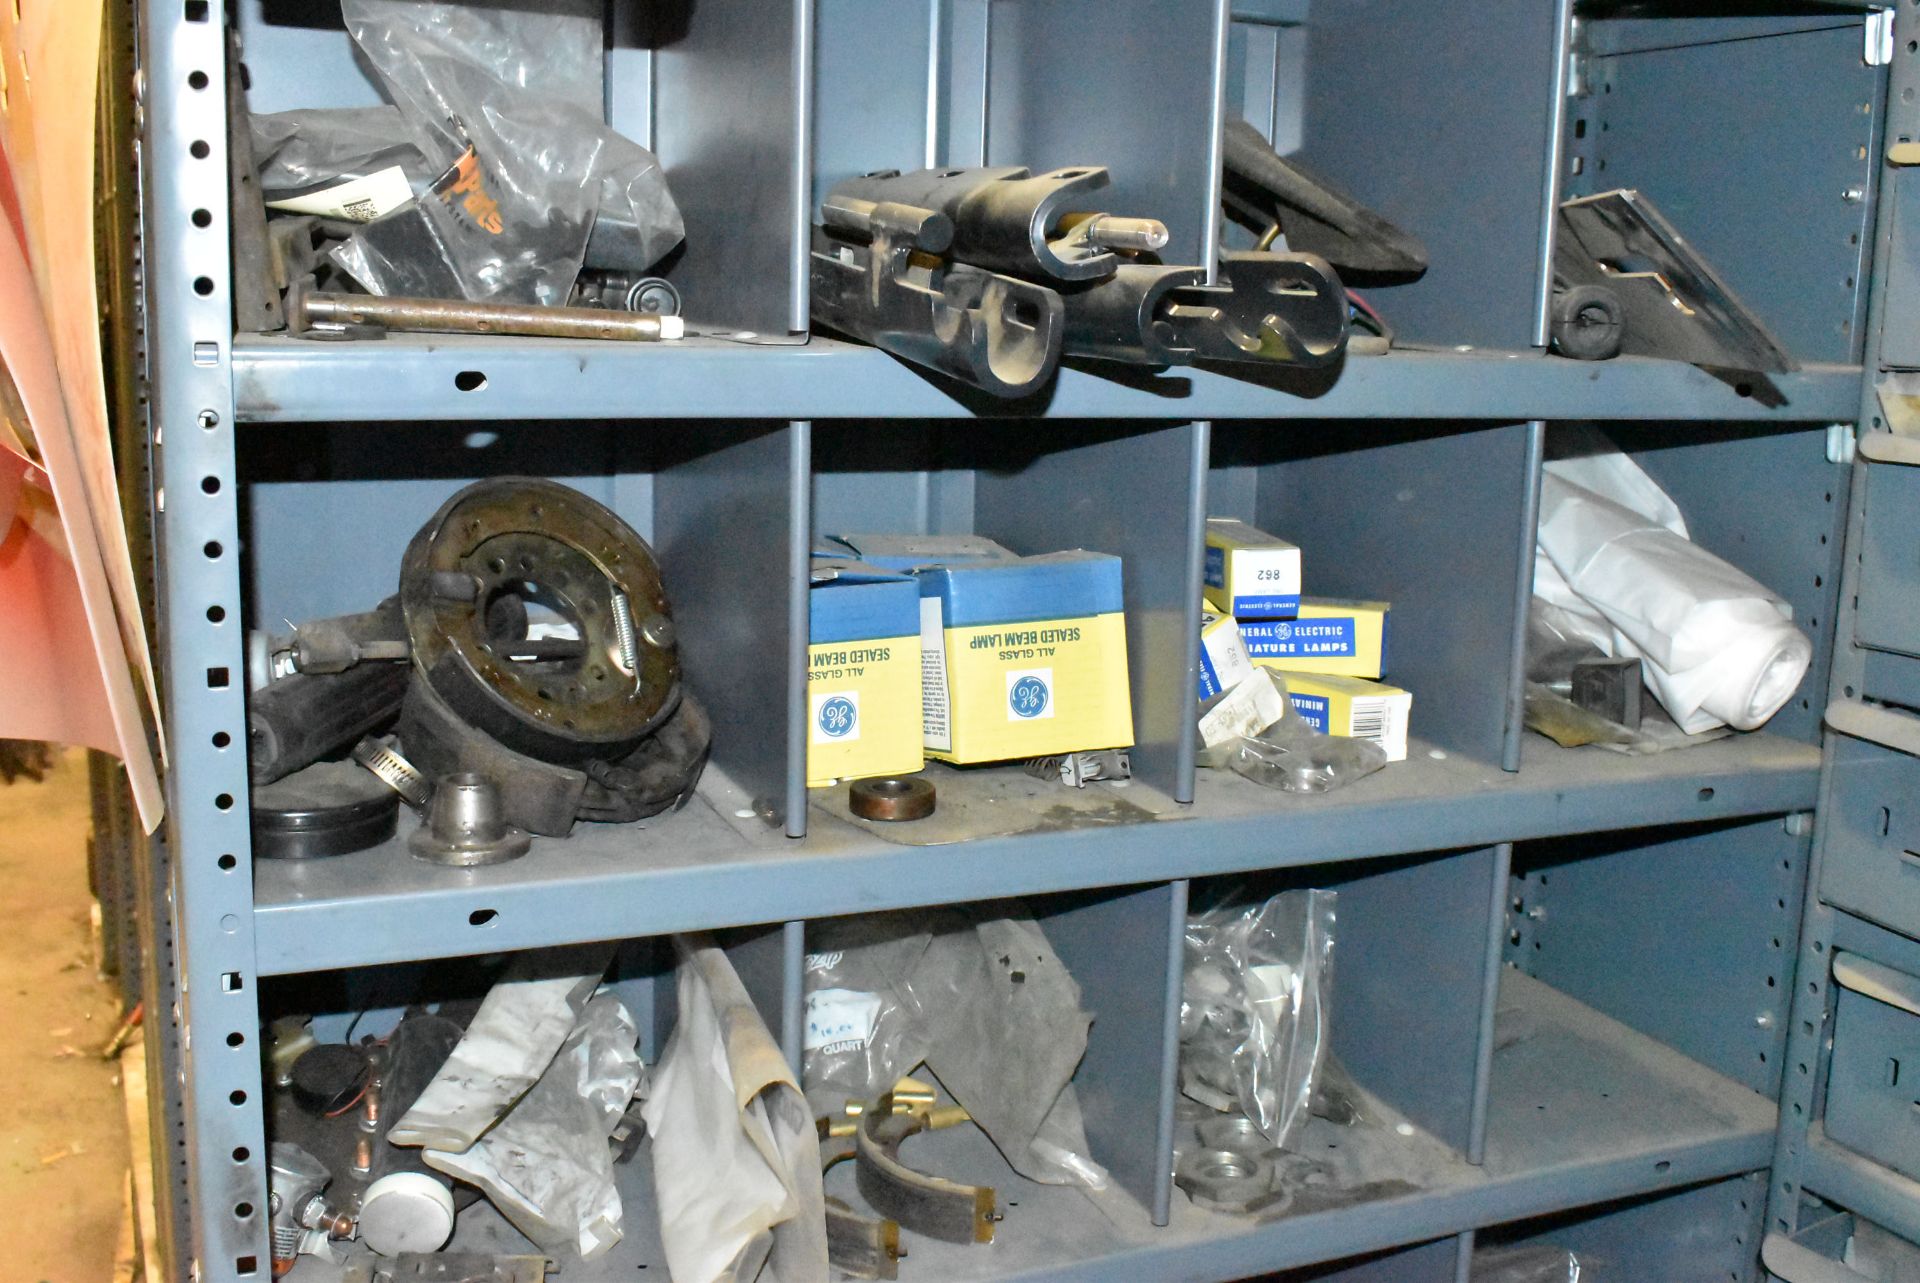 LOT/ SHELF WITH SPARE PARTS - INCLUDING LAMPS, BRAKE PARTS, PULLEYS [RIGGING FEE FOR LOT #125 - $ - Image 3 of 5